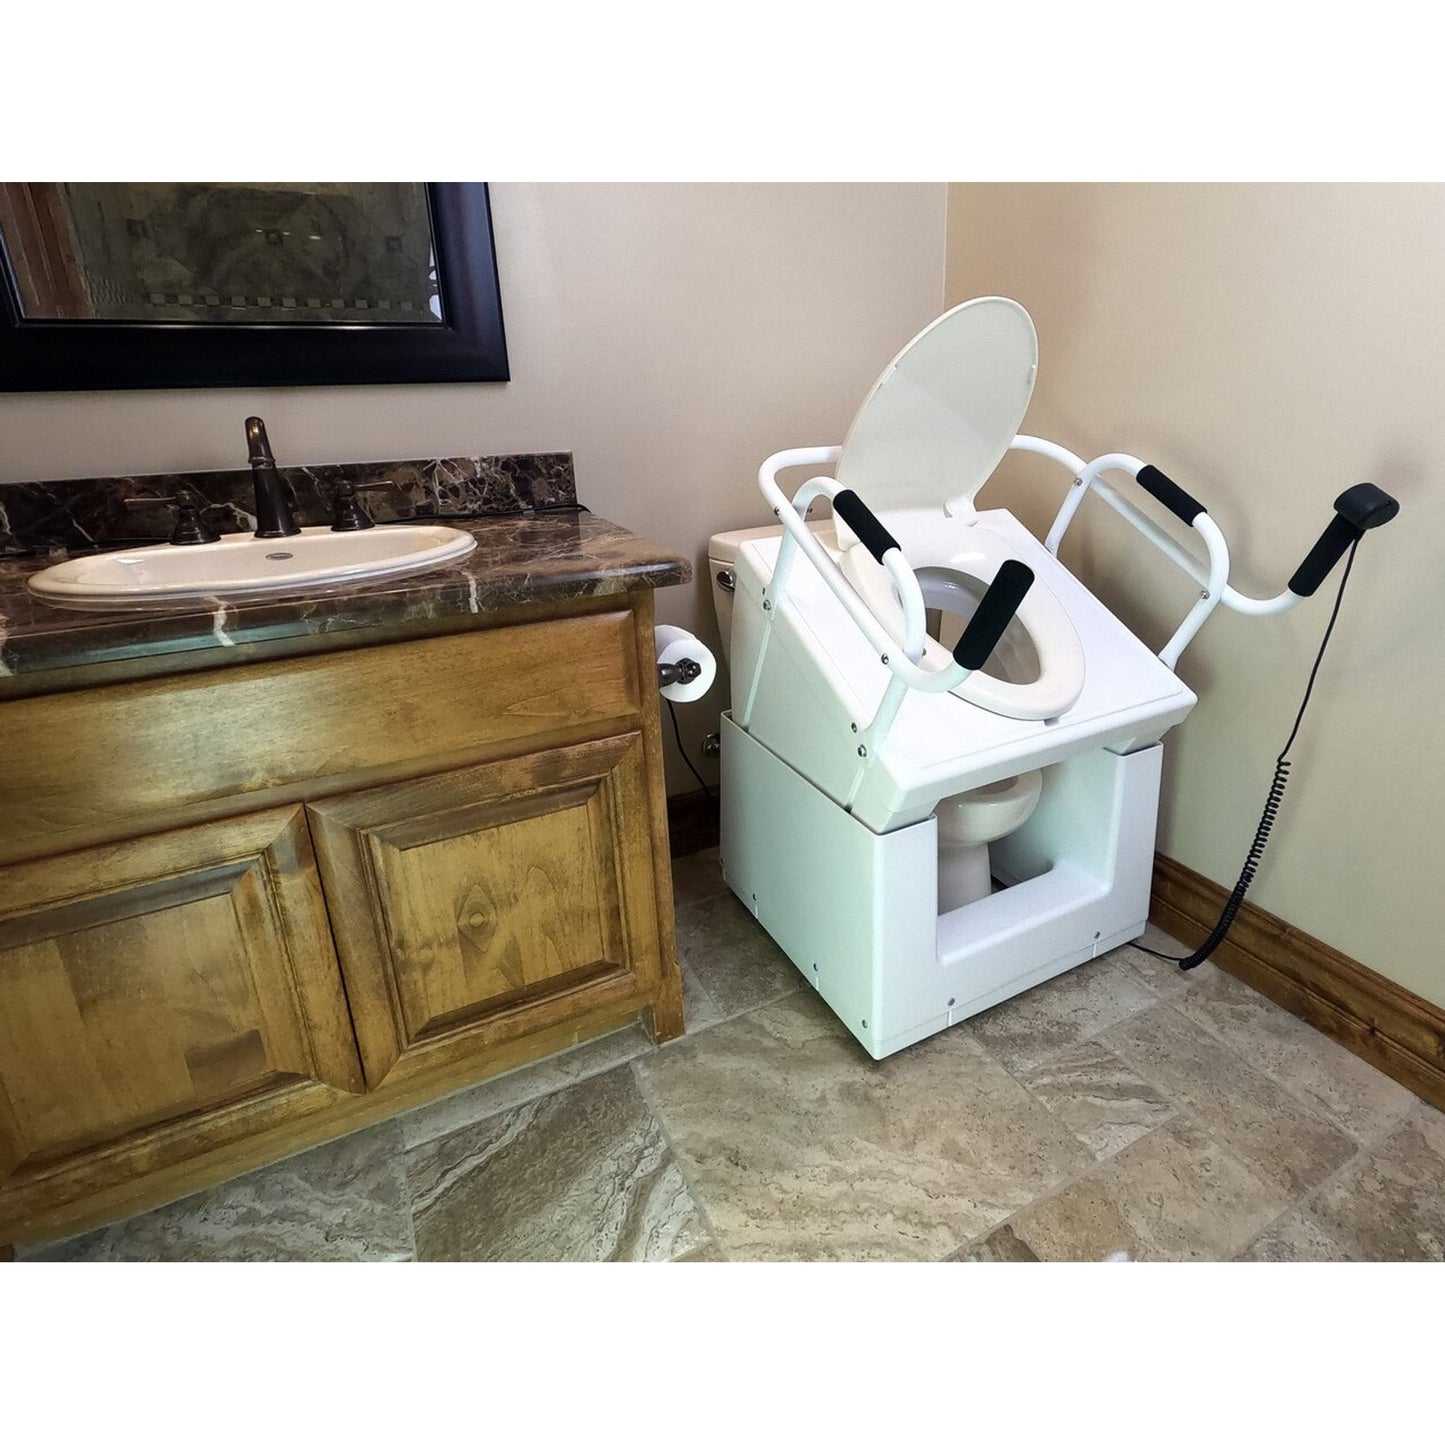 Throne Buttler 37" Powered Toilet Lift Chair With 26" Standard Handle Bar, Bidet Seat and Fitted Splash Guard